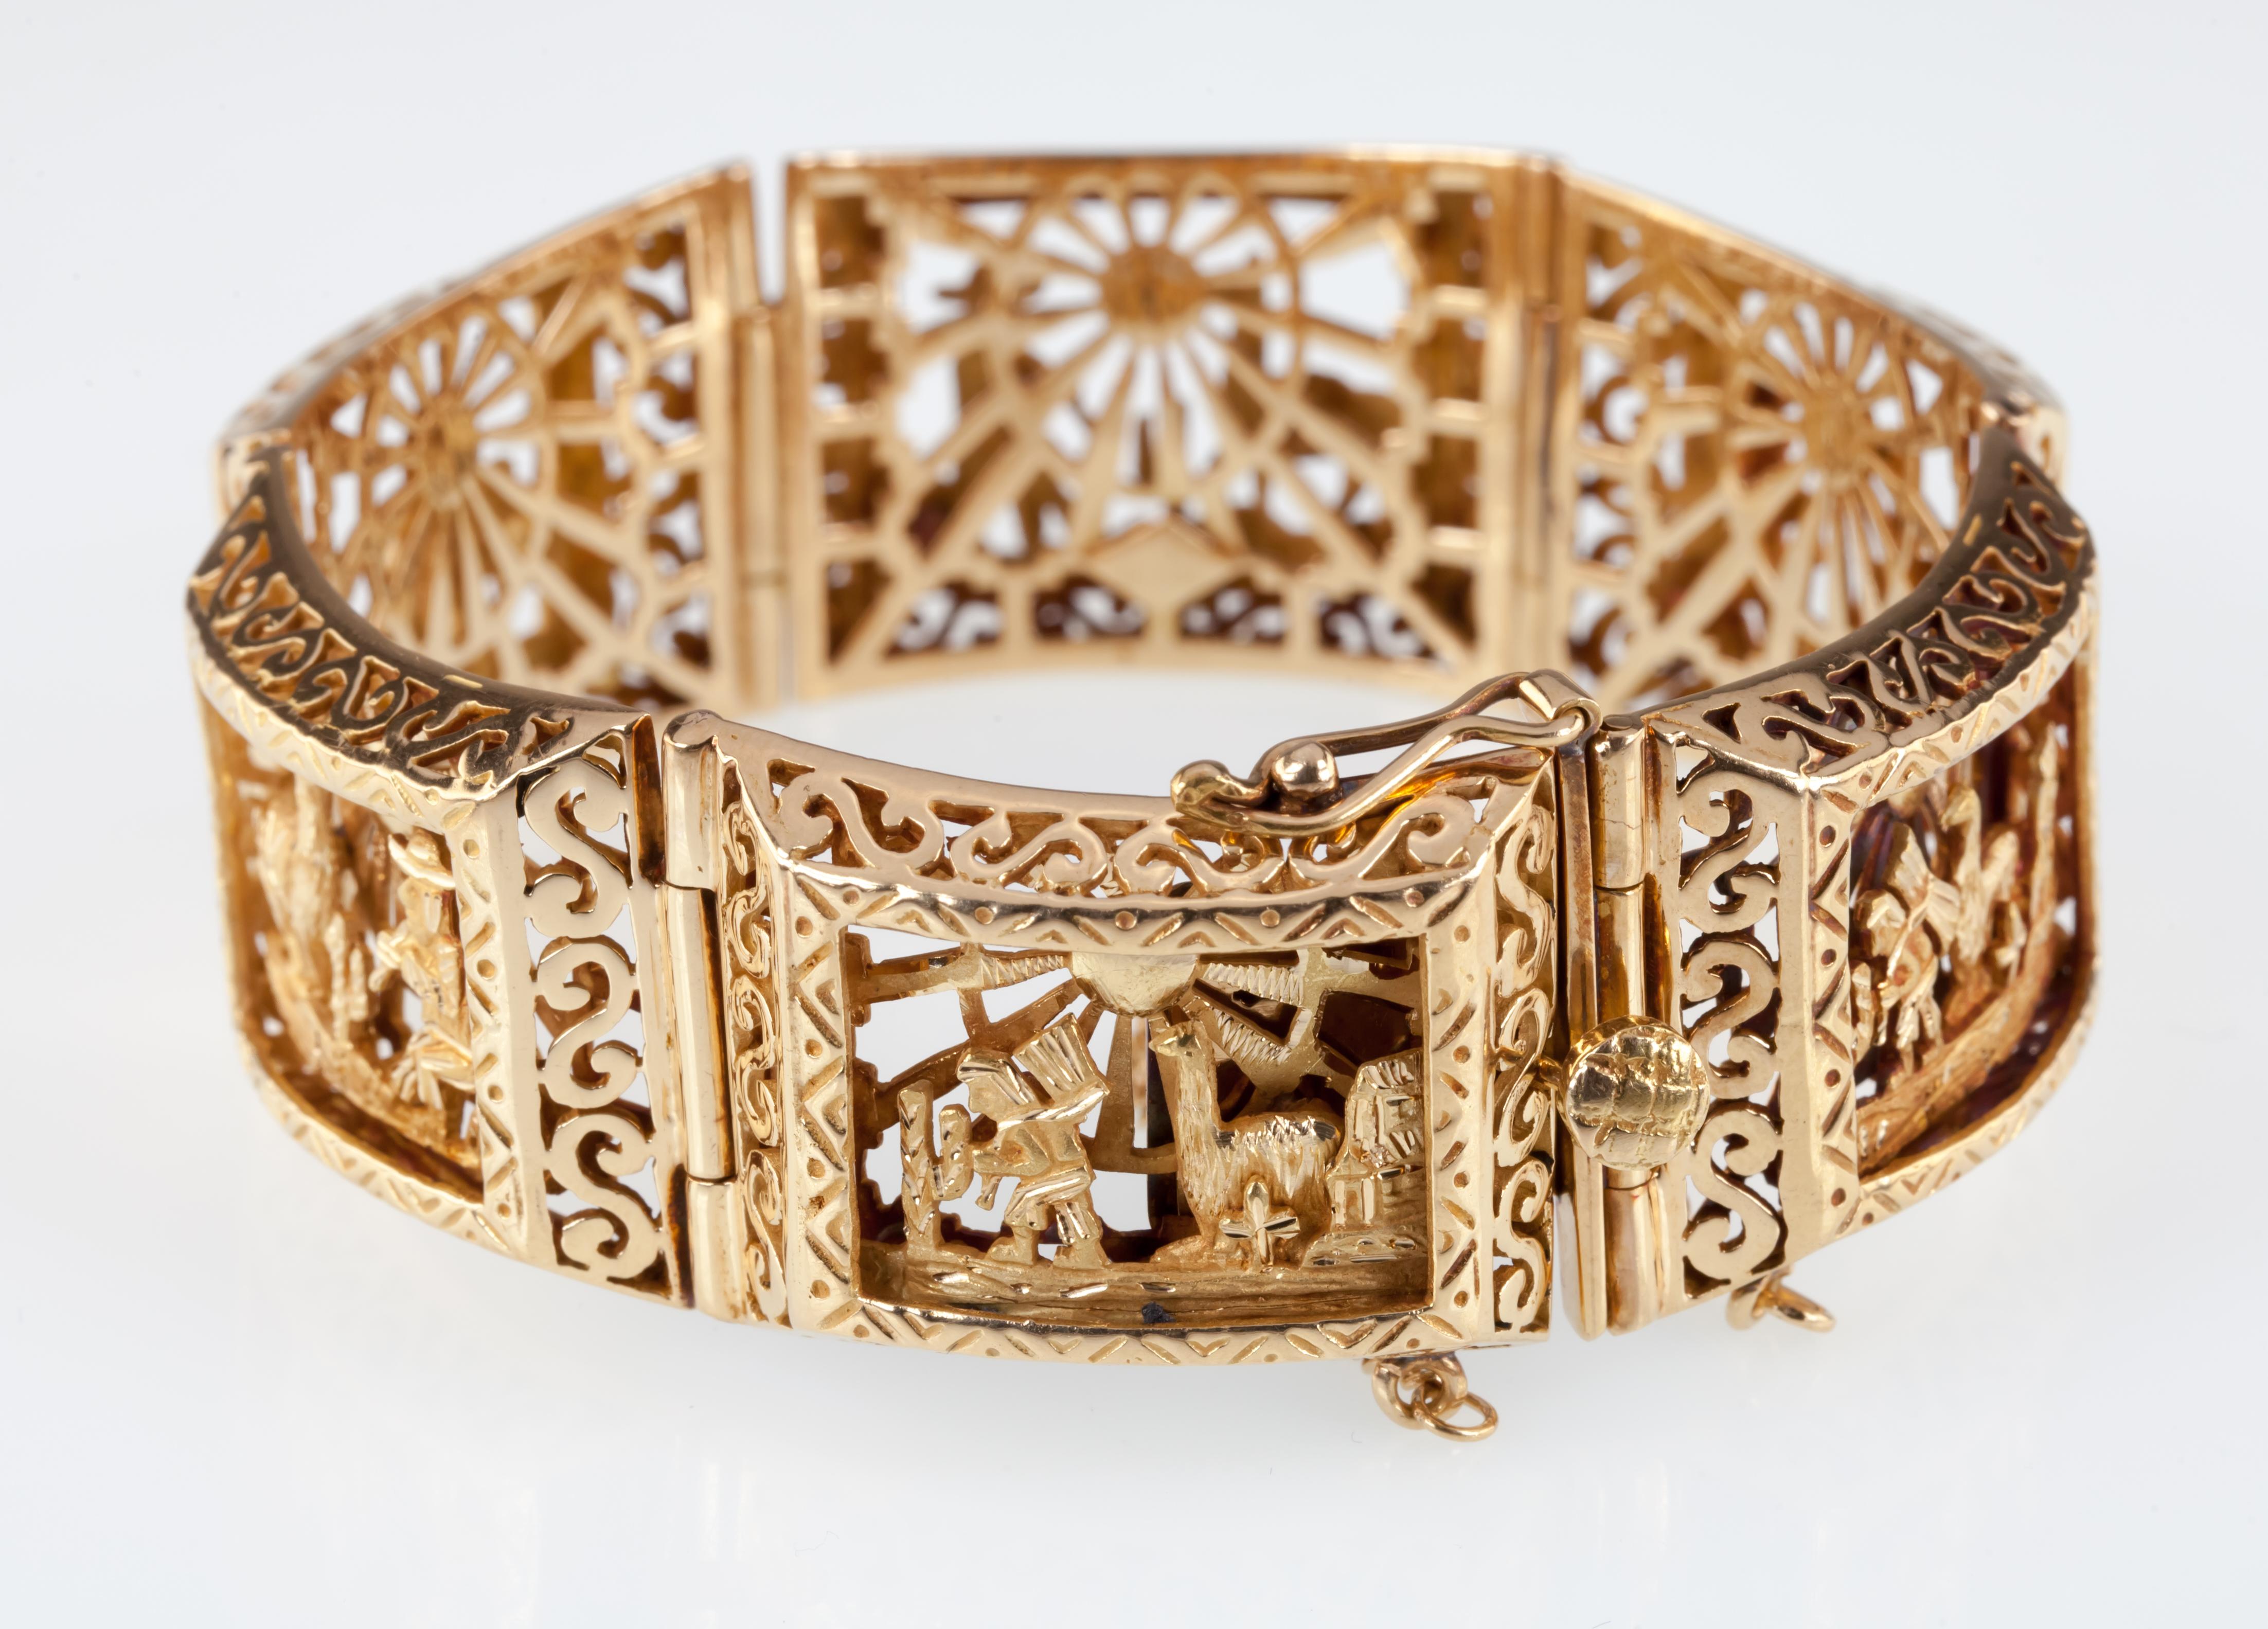 Gorgeous, Significant Arte Orfebre Bracelet
Features Alternating Shadowbox Links Featuring Scenes of Etched Gold
18k Yellow Gold
Total Mass = 75.6 grams
Total Length = 7.25